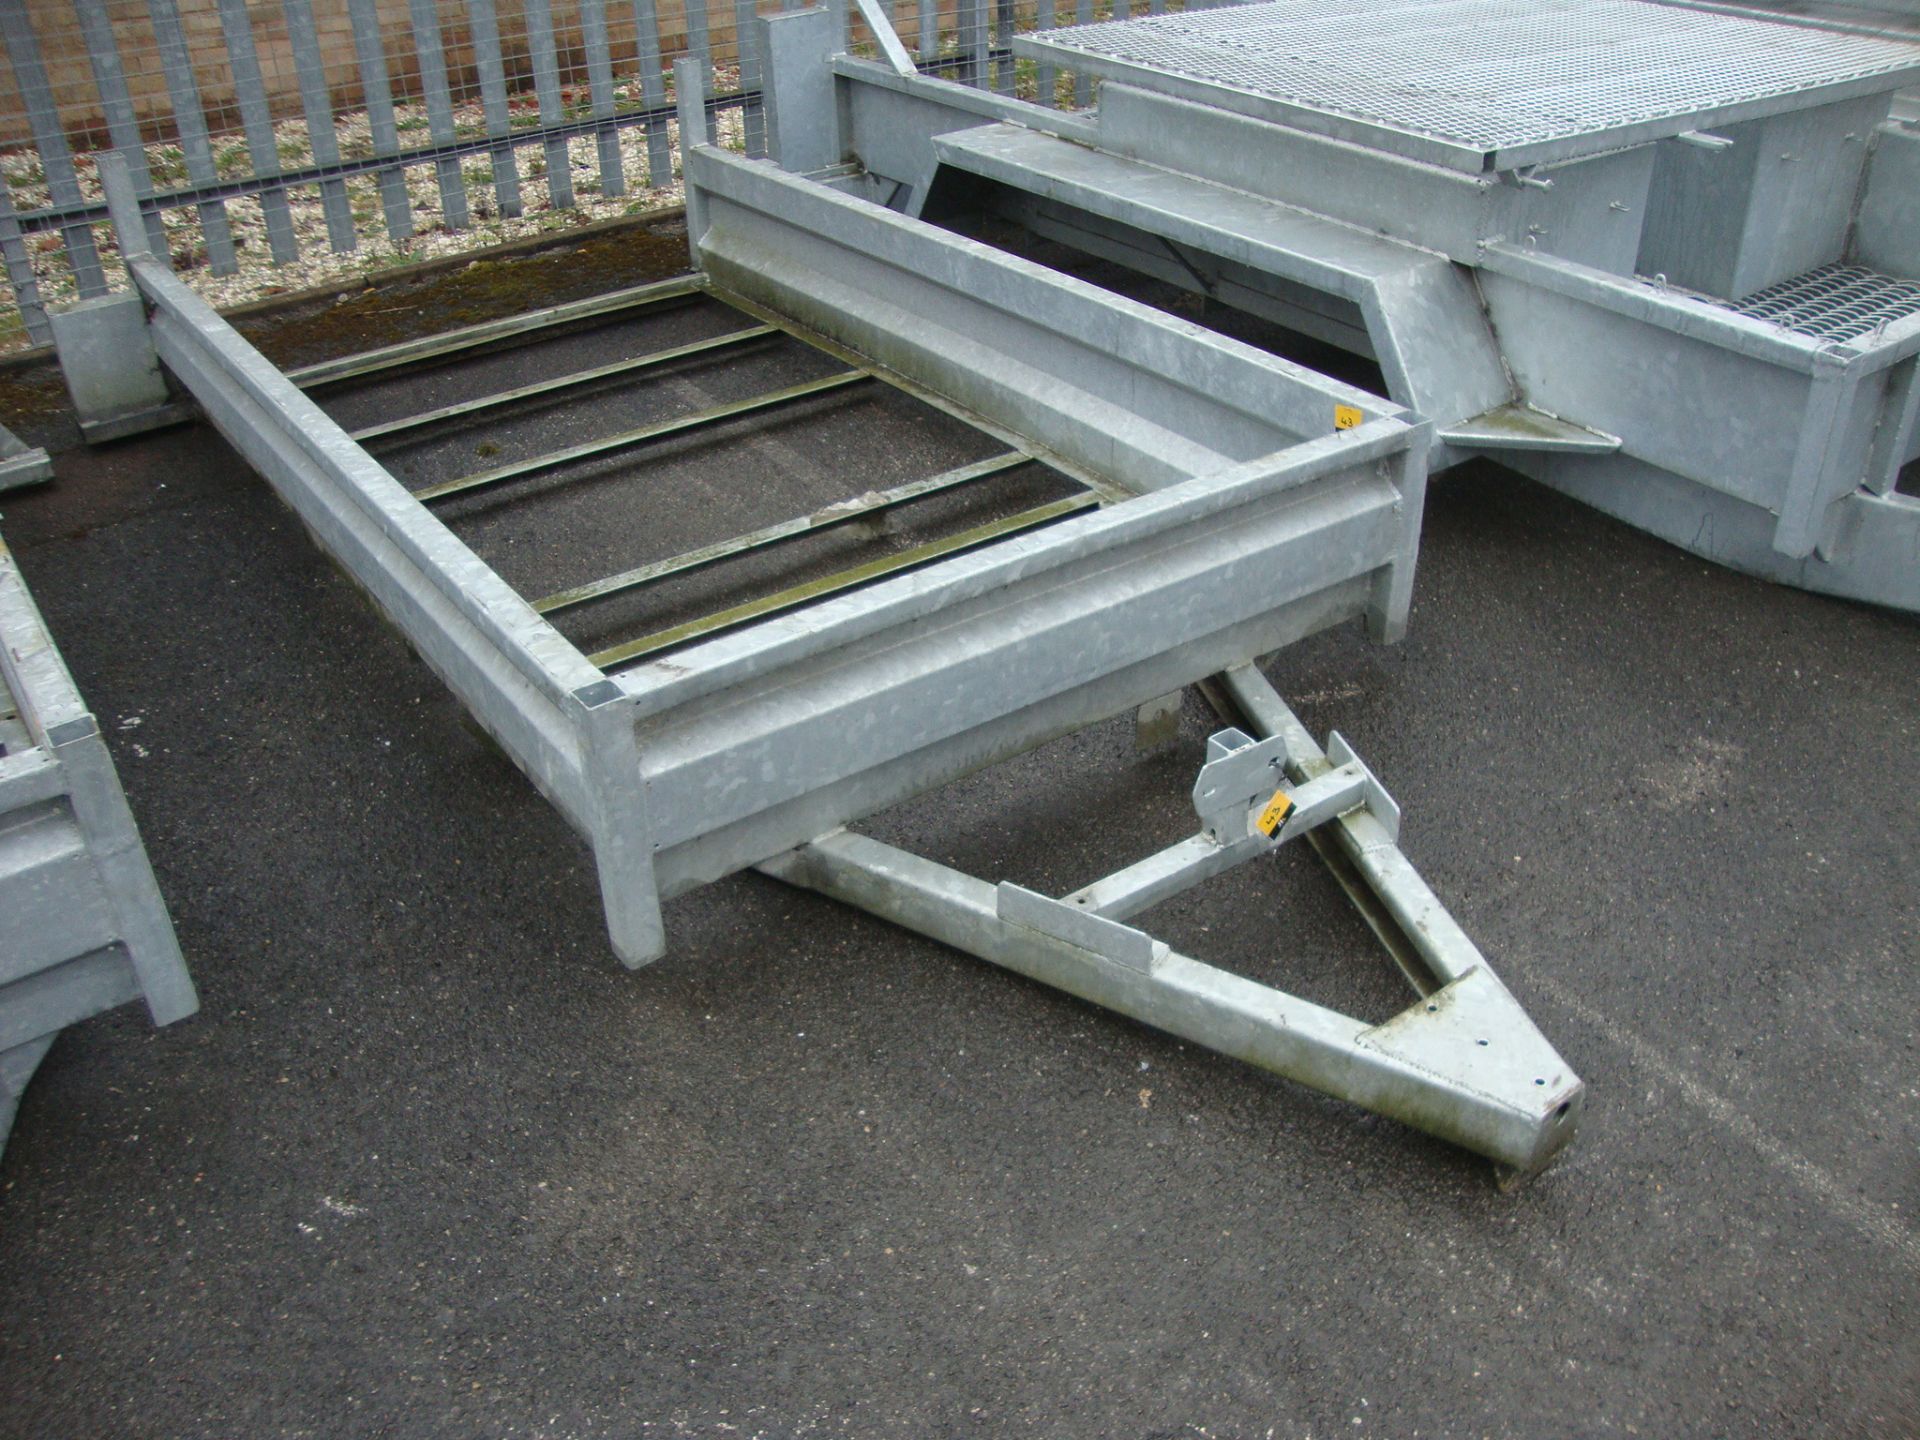 Trailer chassis/frame – galvanised, bed size 213cm (l) x 121cm (w), excluding the A-frame as